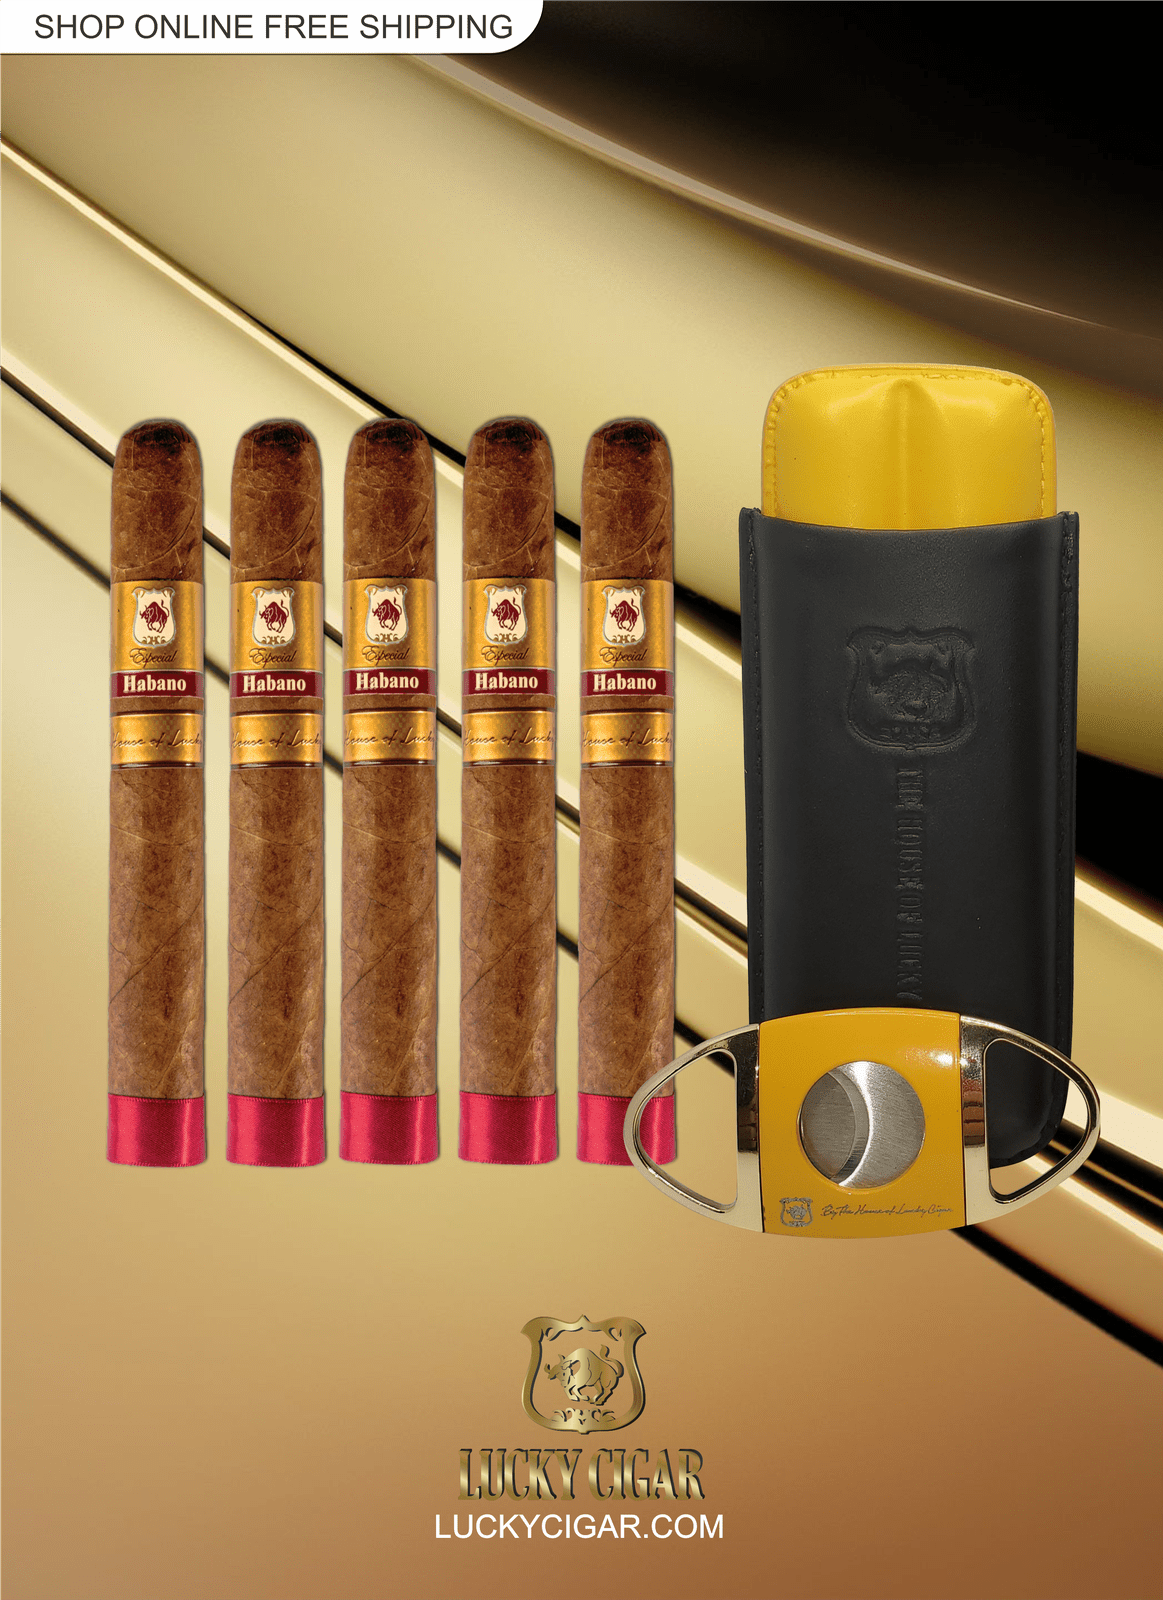 Lucky Cigar Sampler Sets: Set of 5 Especial Habano Toro Cigars with Cutter, Travel Humidor Case